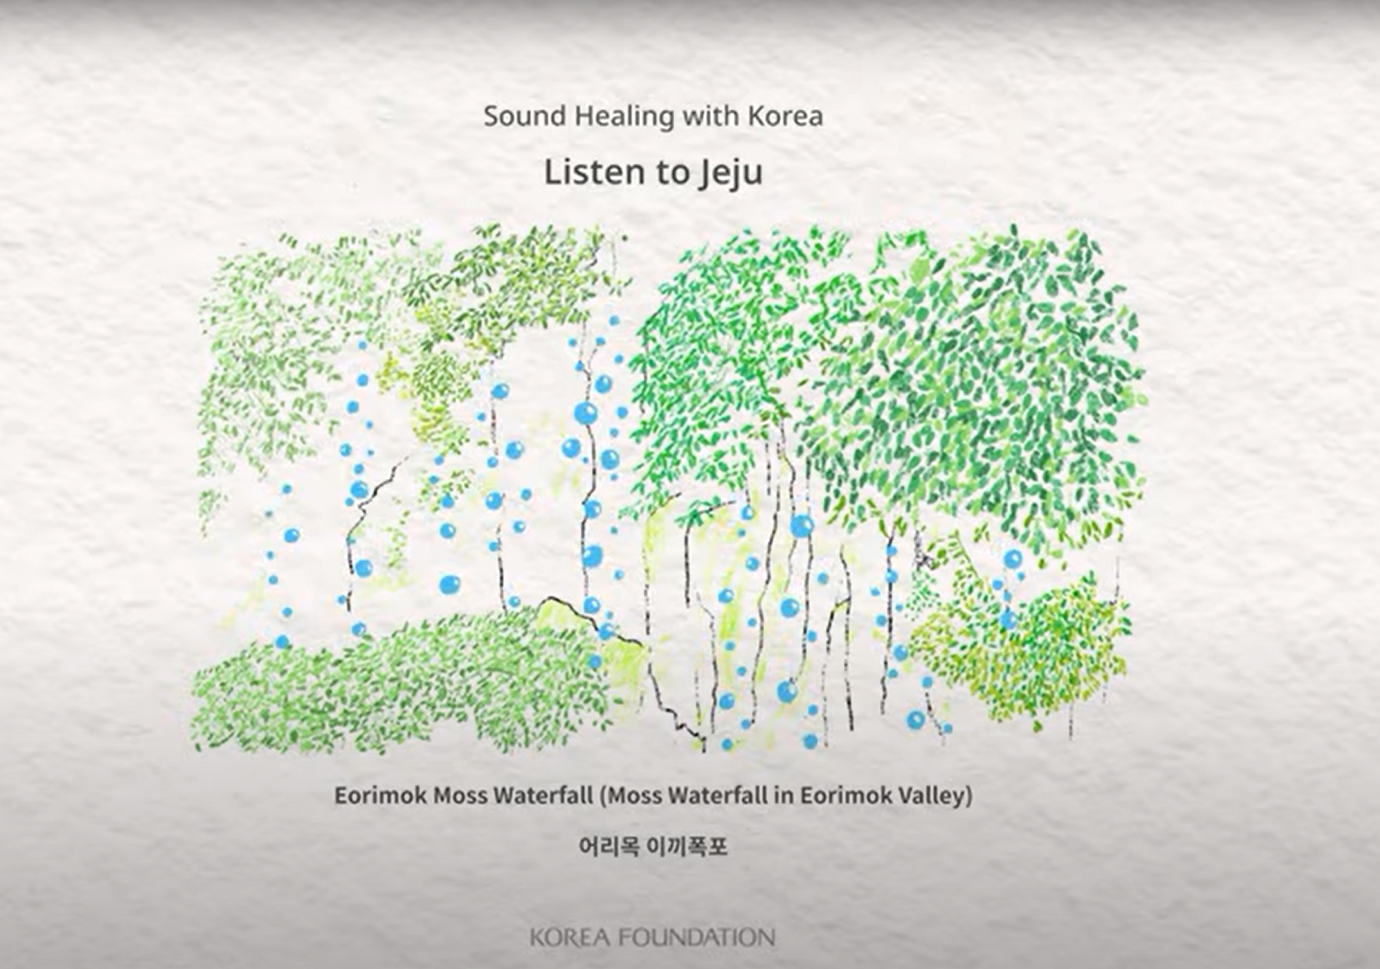 [ASMR] 2021 Sound Healing with Korea - Listen to <font color='red'>Jeju</font> | 2. Eorimok Moss Waterfall